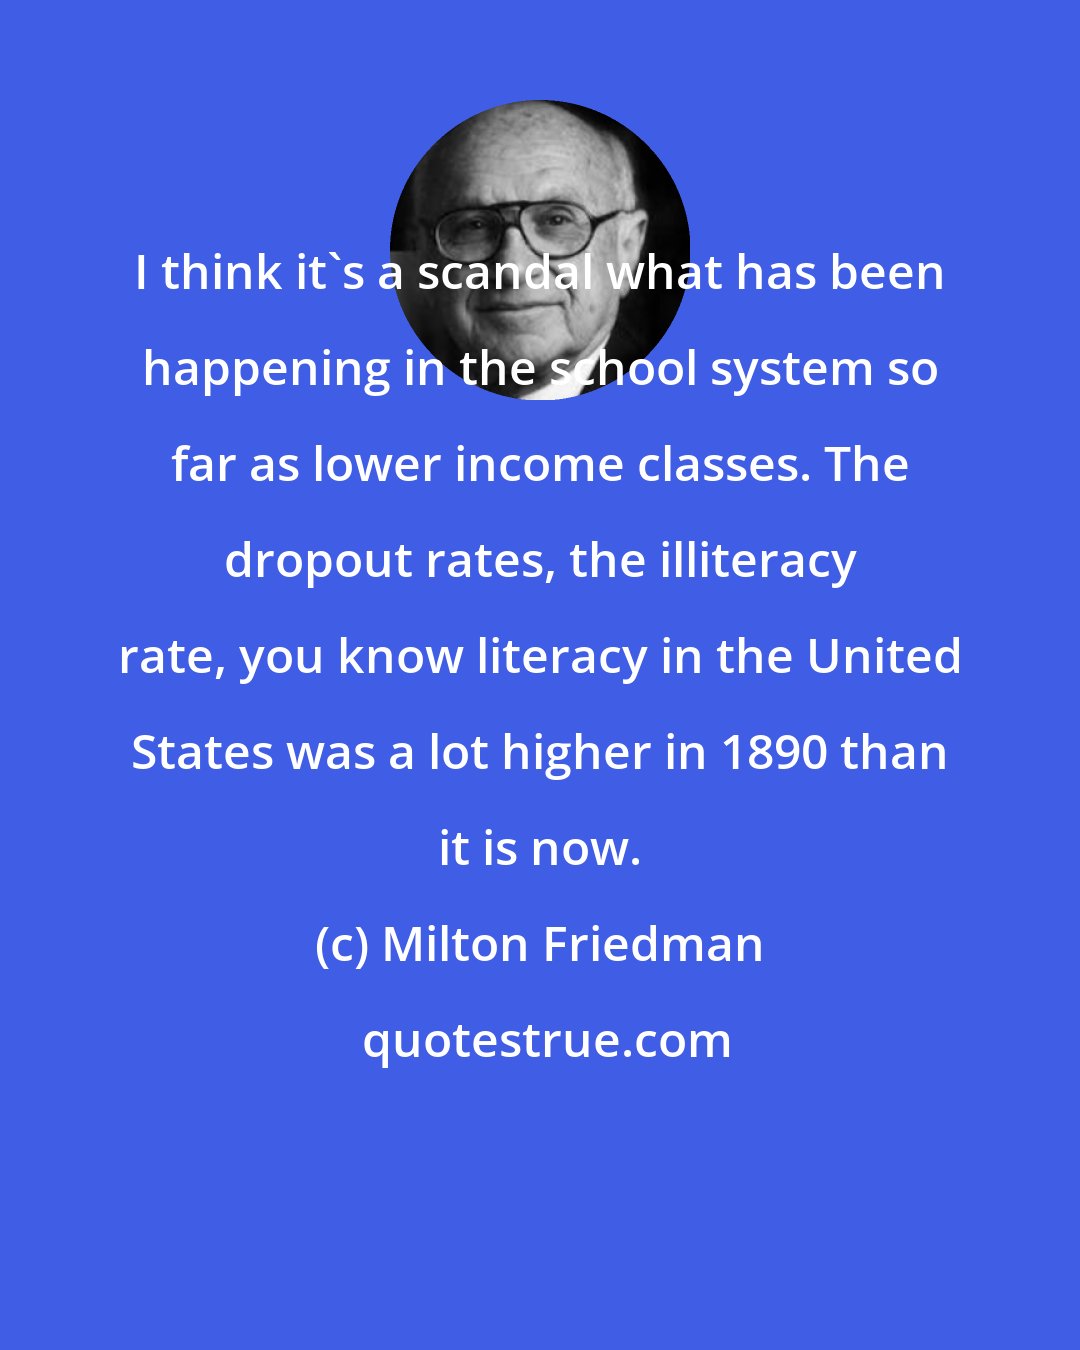 Milton Friedman: I think it's a scandal what has been happening in the school system so far as lower income classes. The dropout rates, the illiteracy rate, you know literacy in the United States was a lot higher in 1890 than it is now.